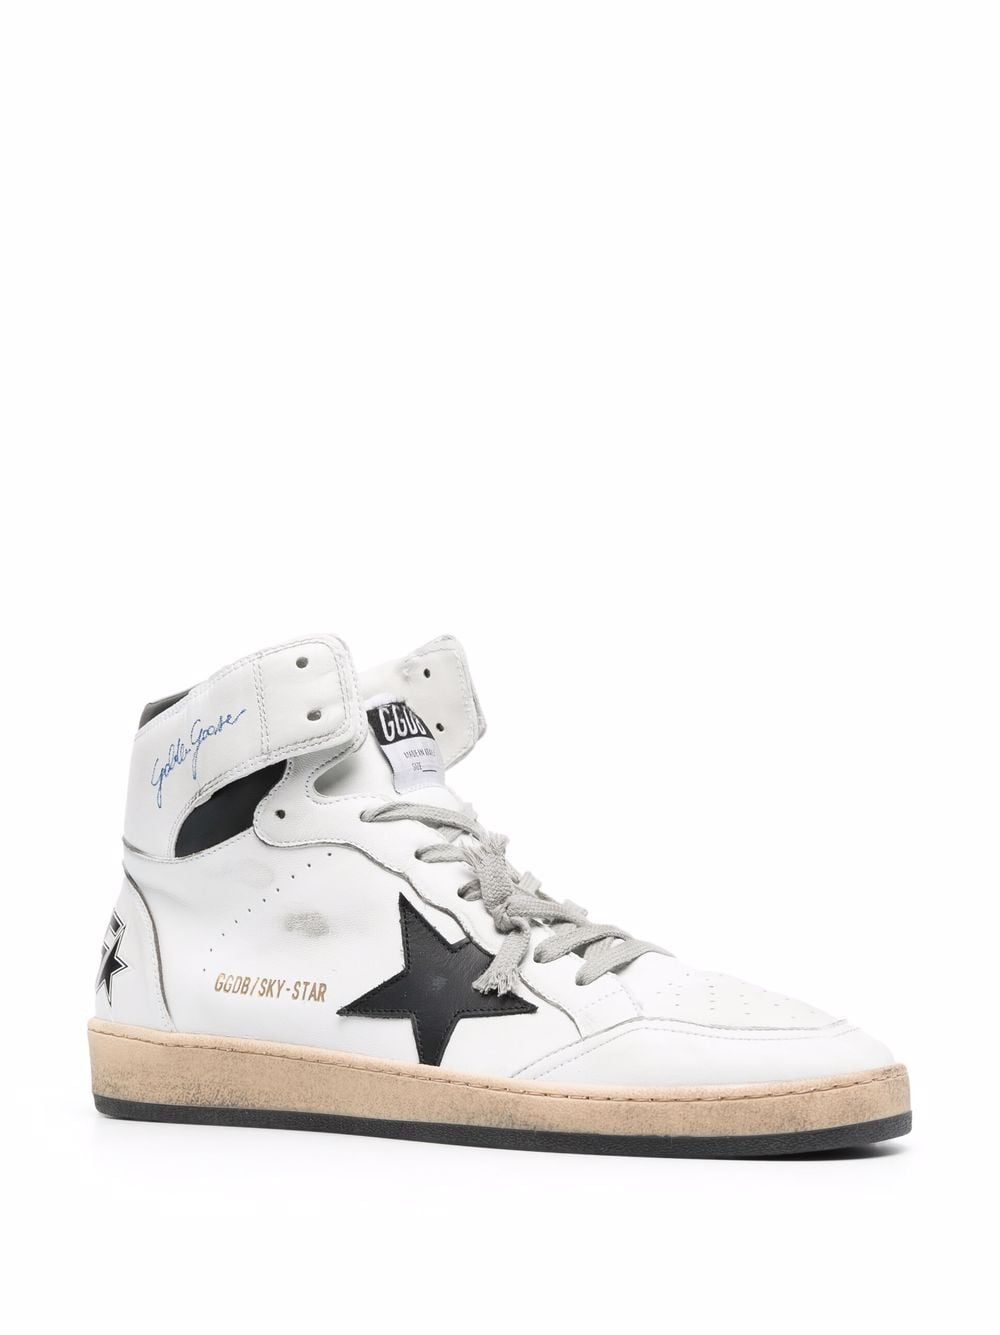 Golden Goose Men's Shoes High Top Leather Trainers Sneakers Sky-star In ...